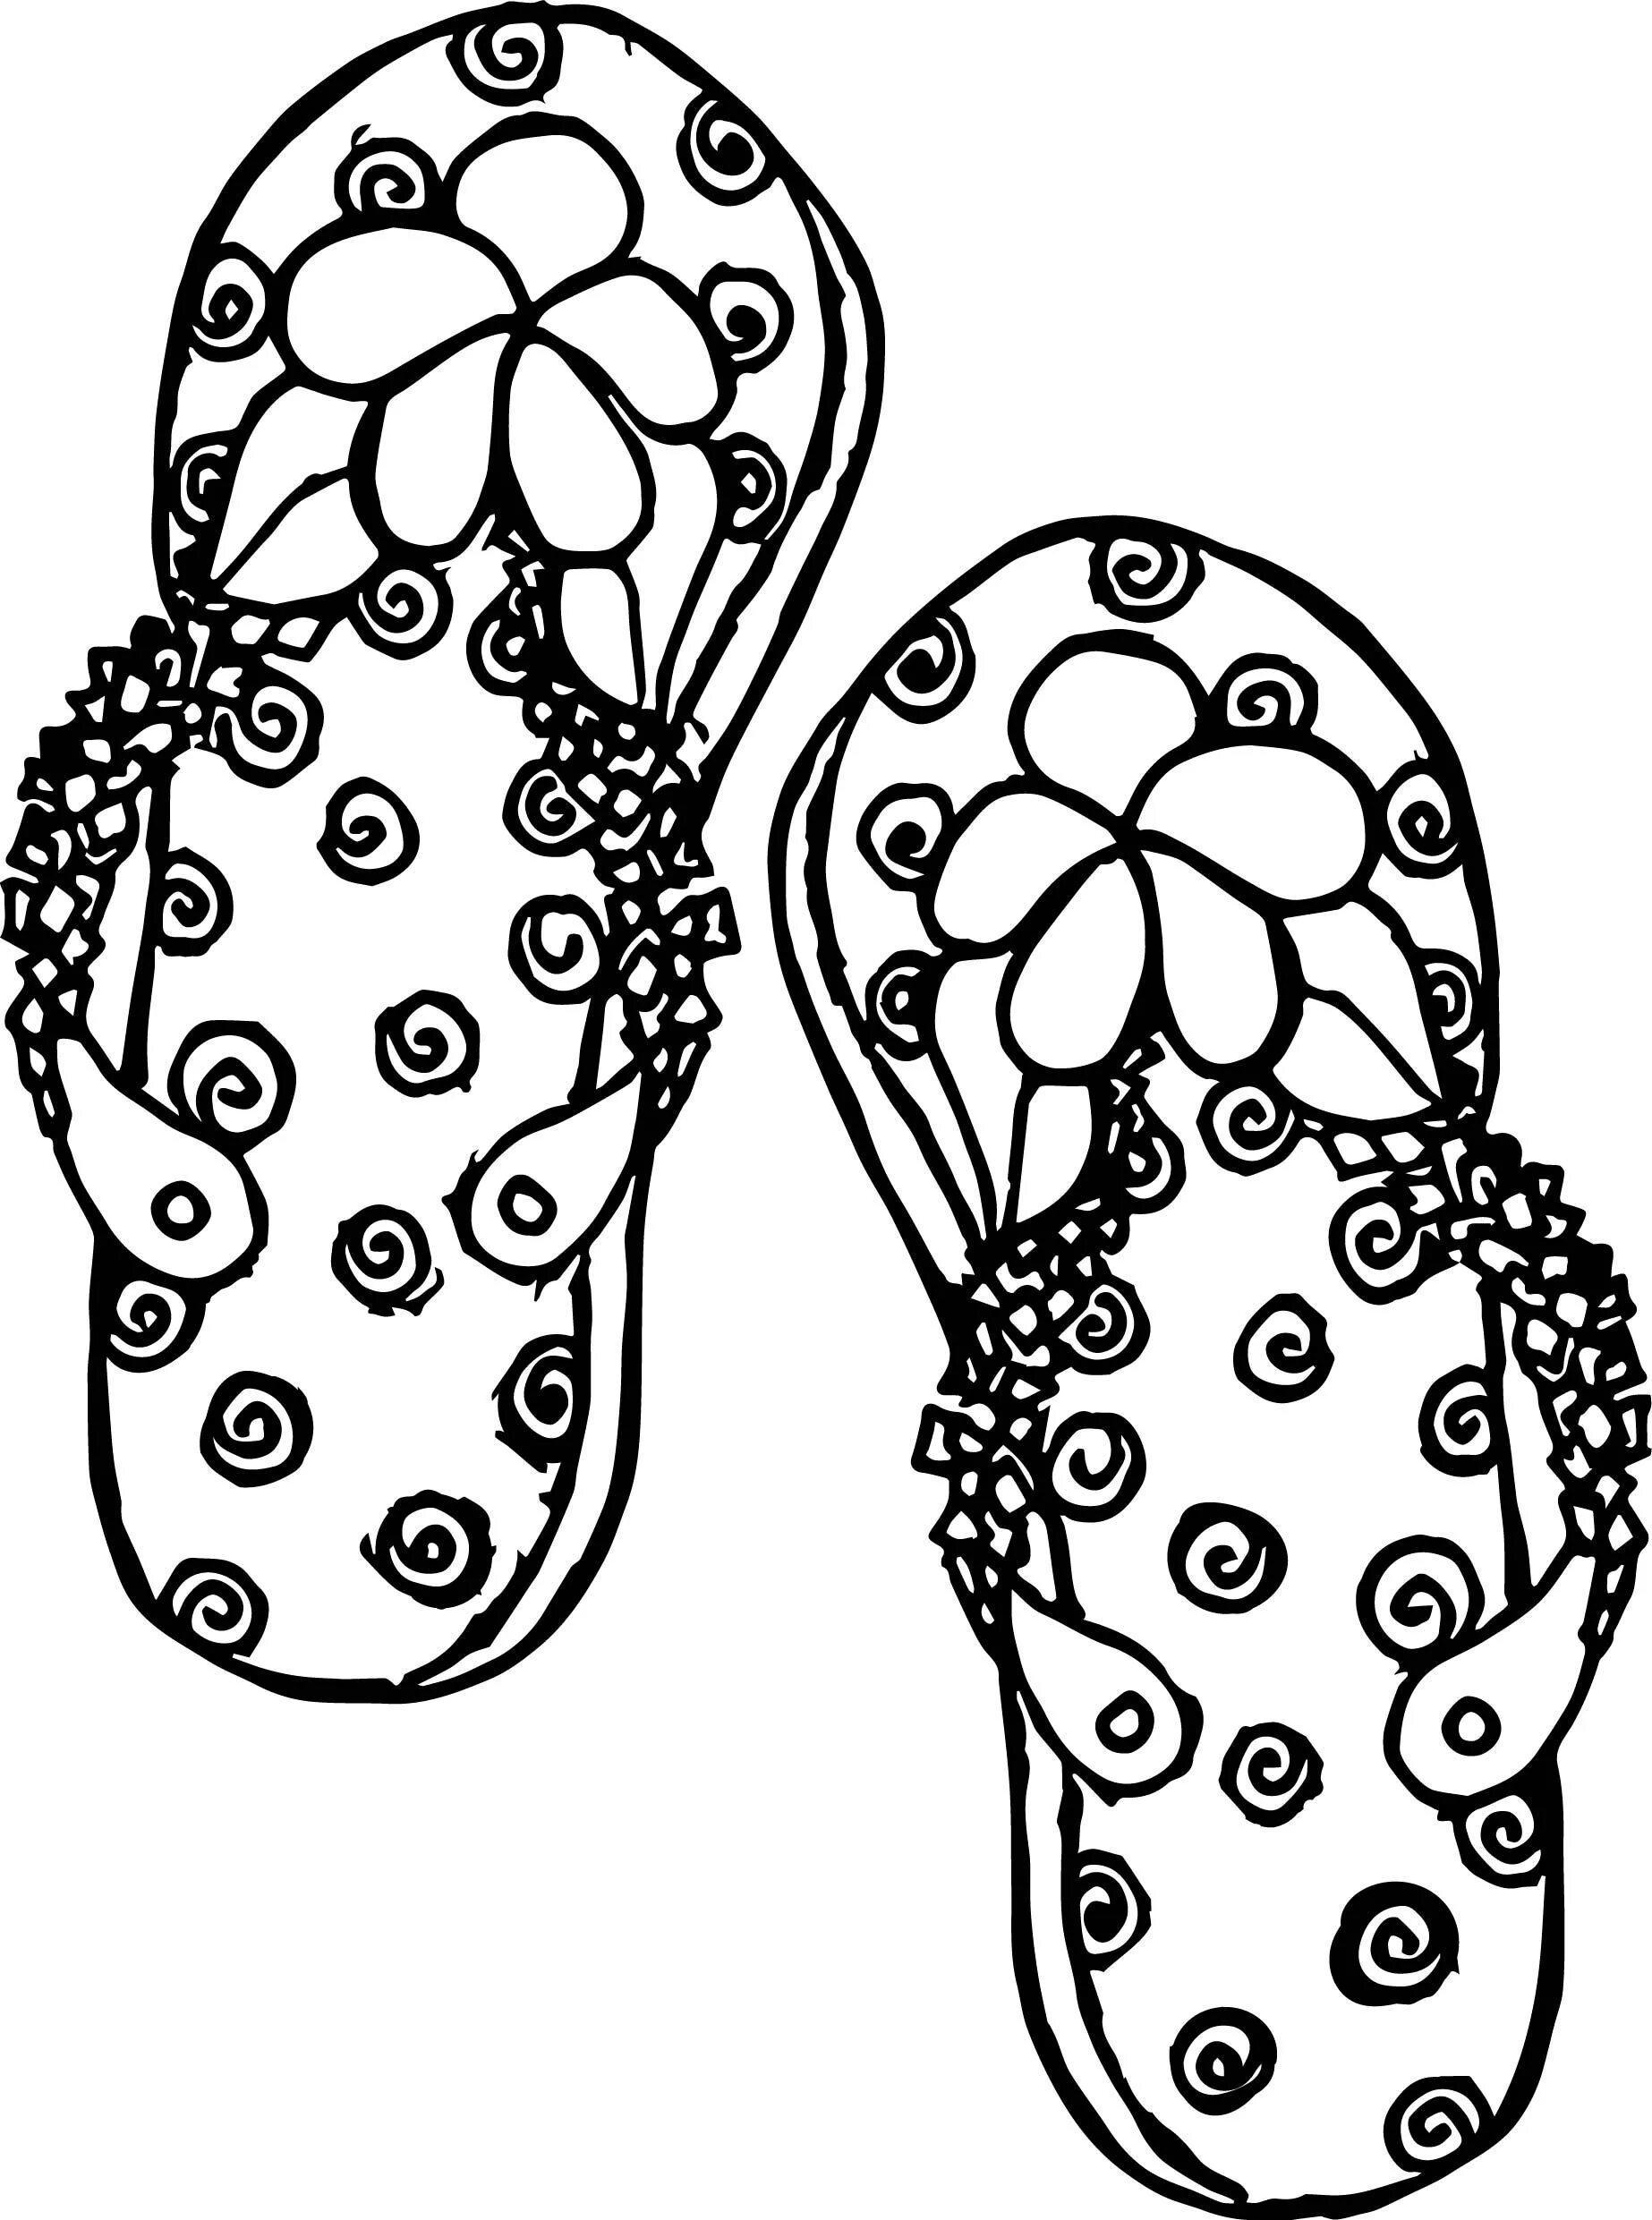 Great slippers coloring for kids